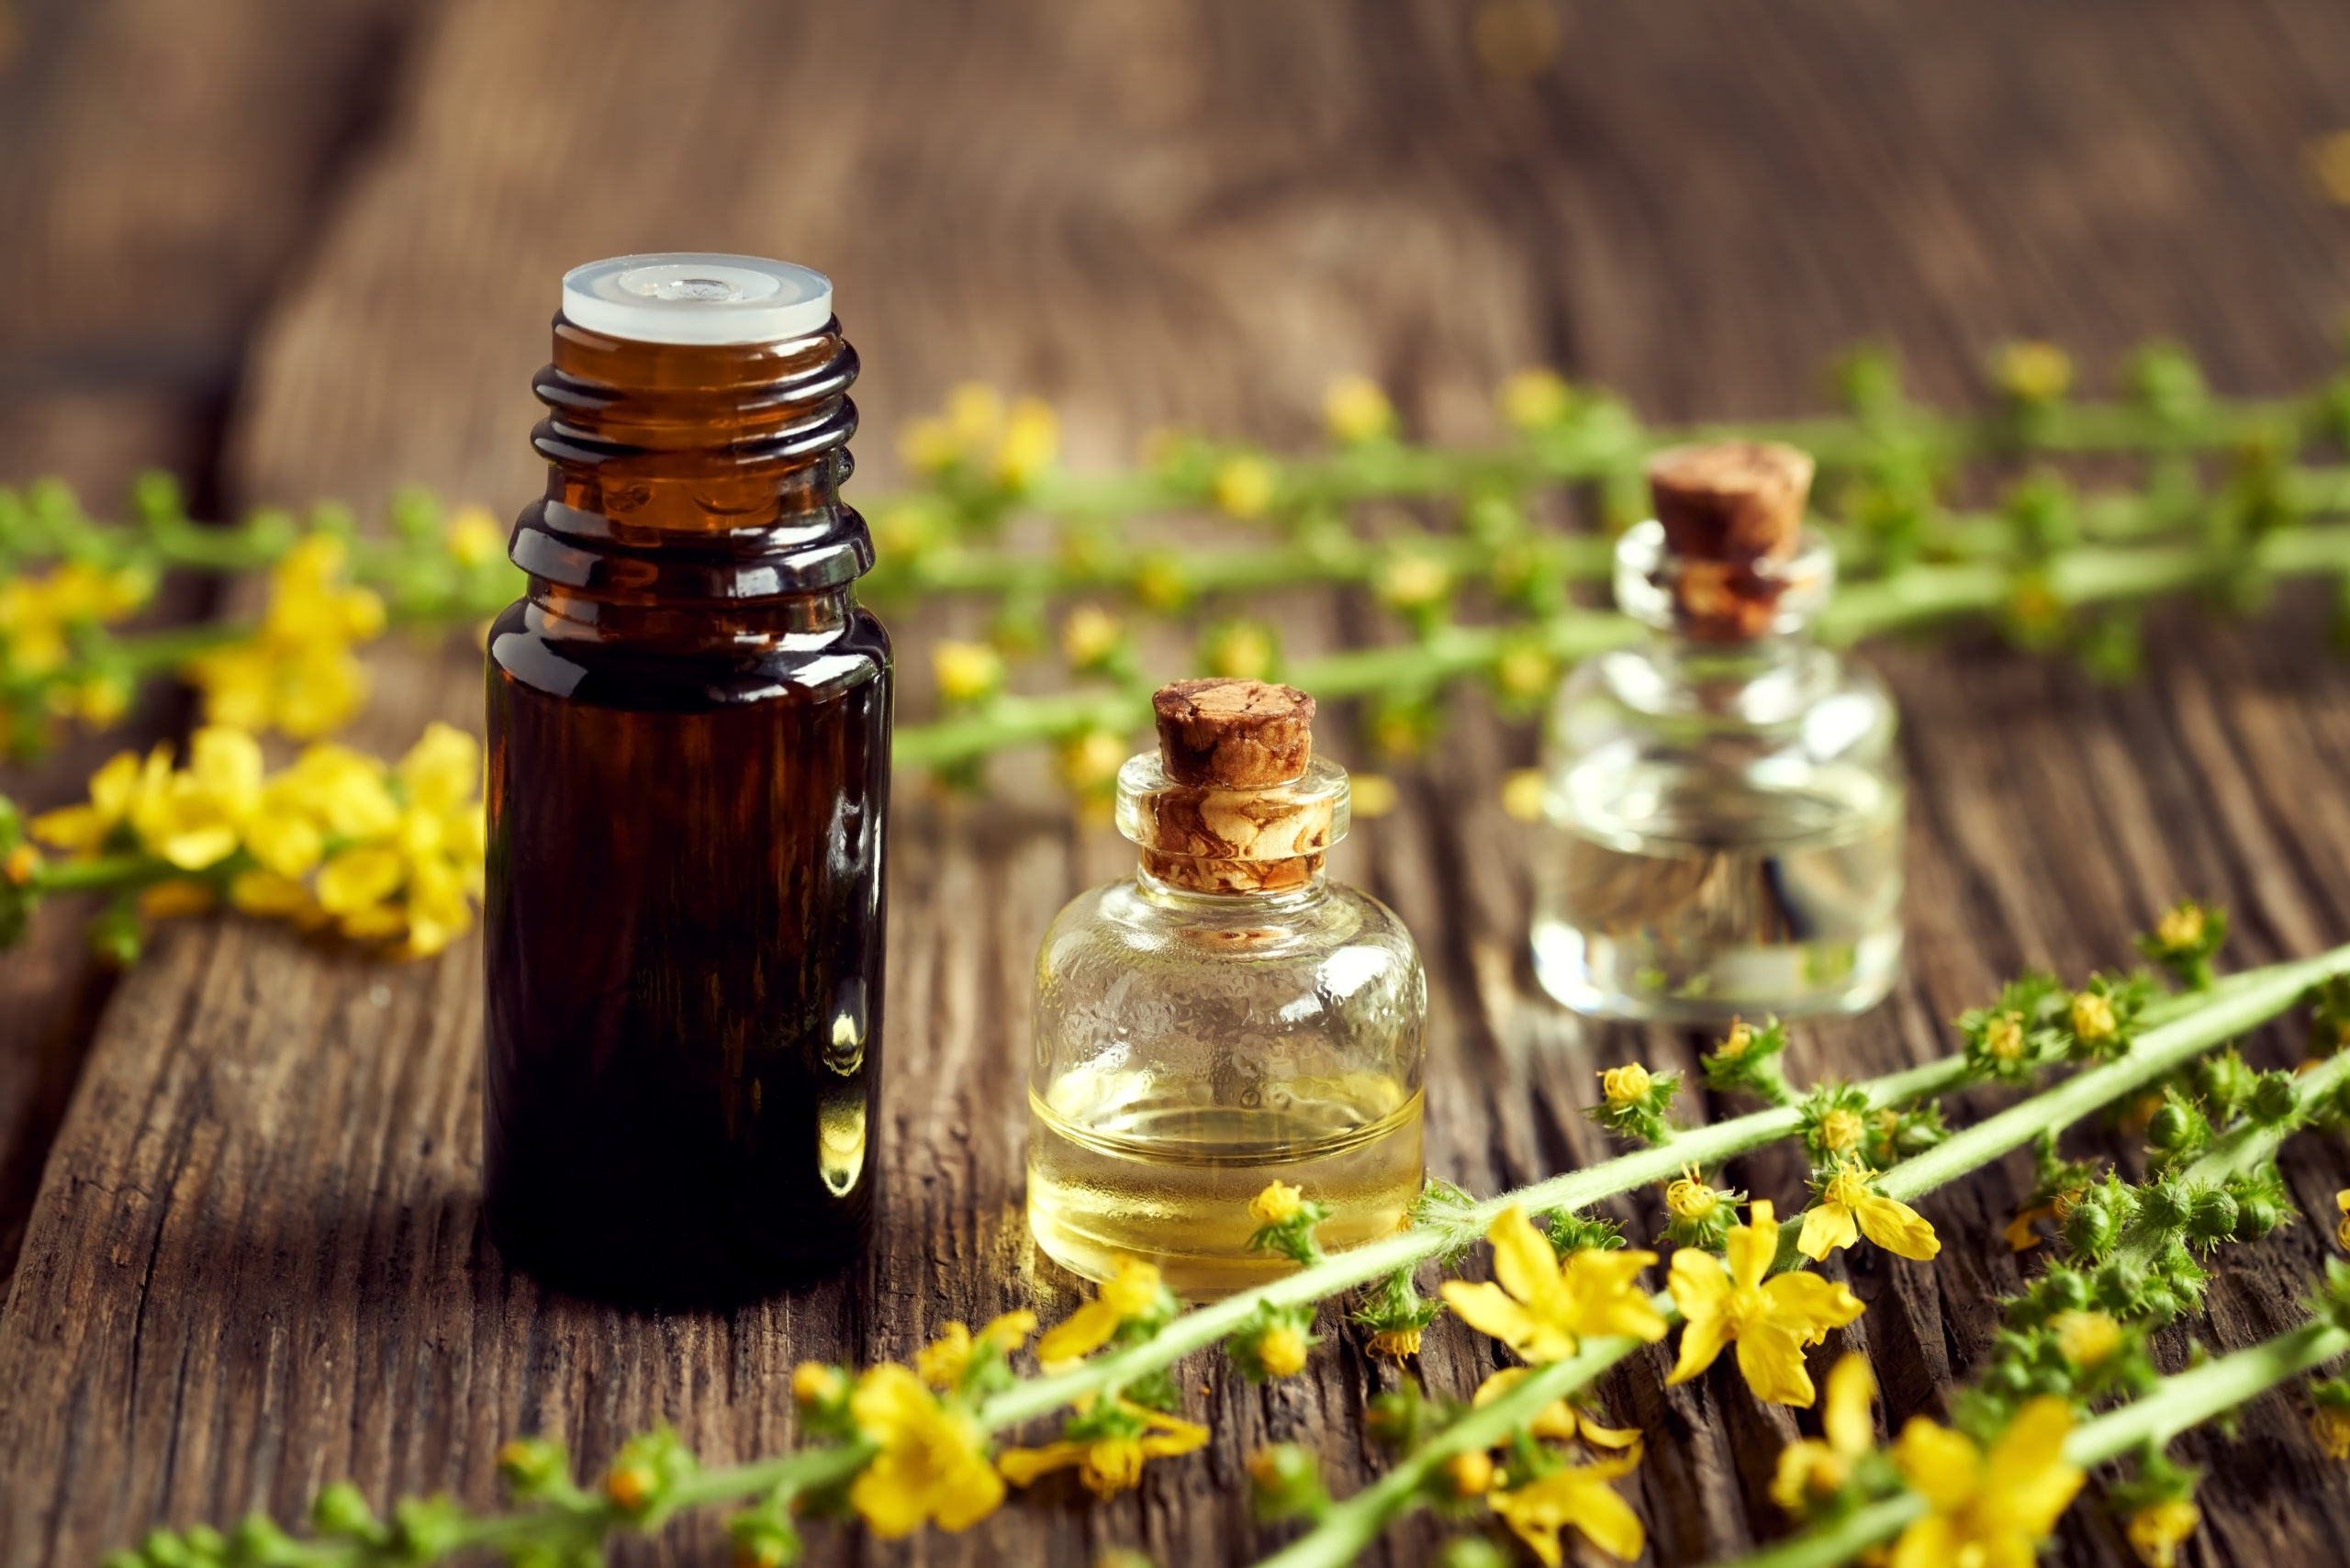 A bottle of aromatherapy essential oil with fresh agrimony flowe